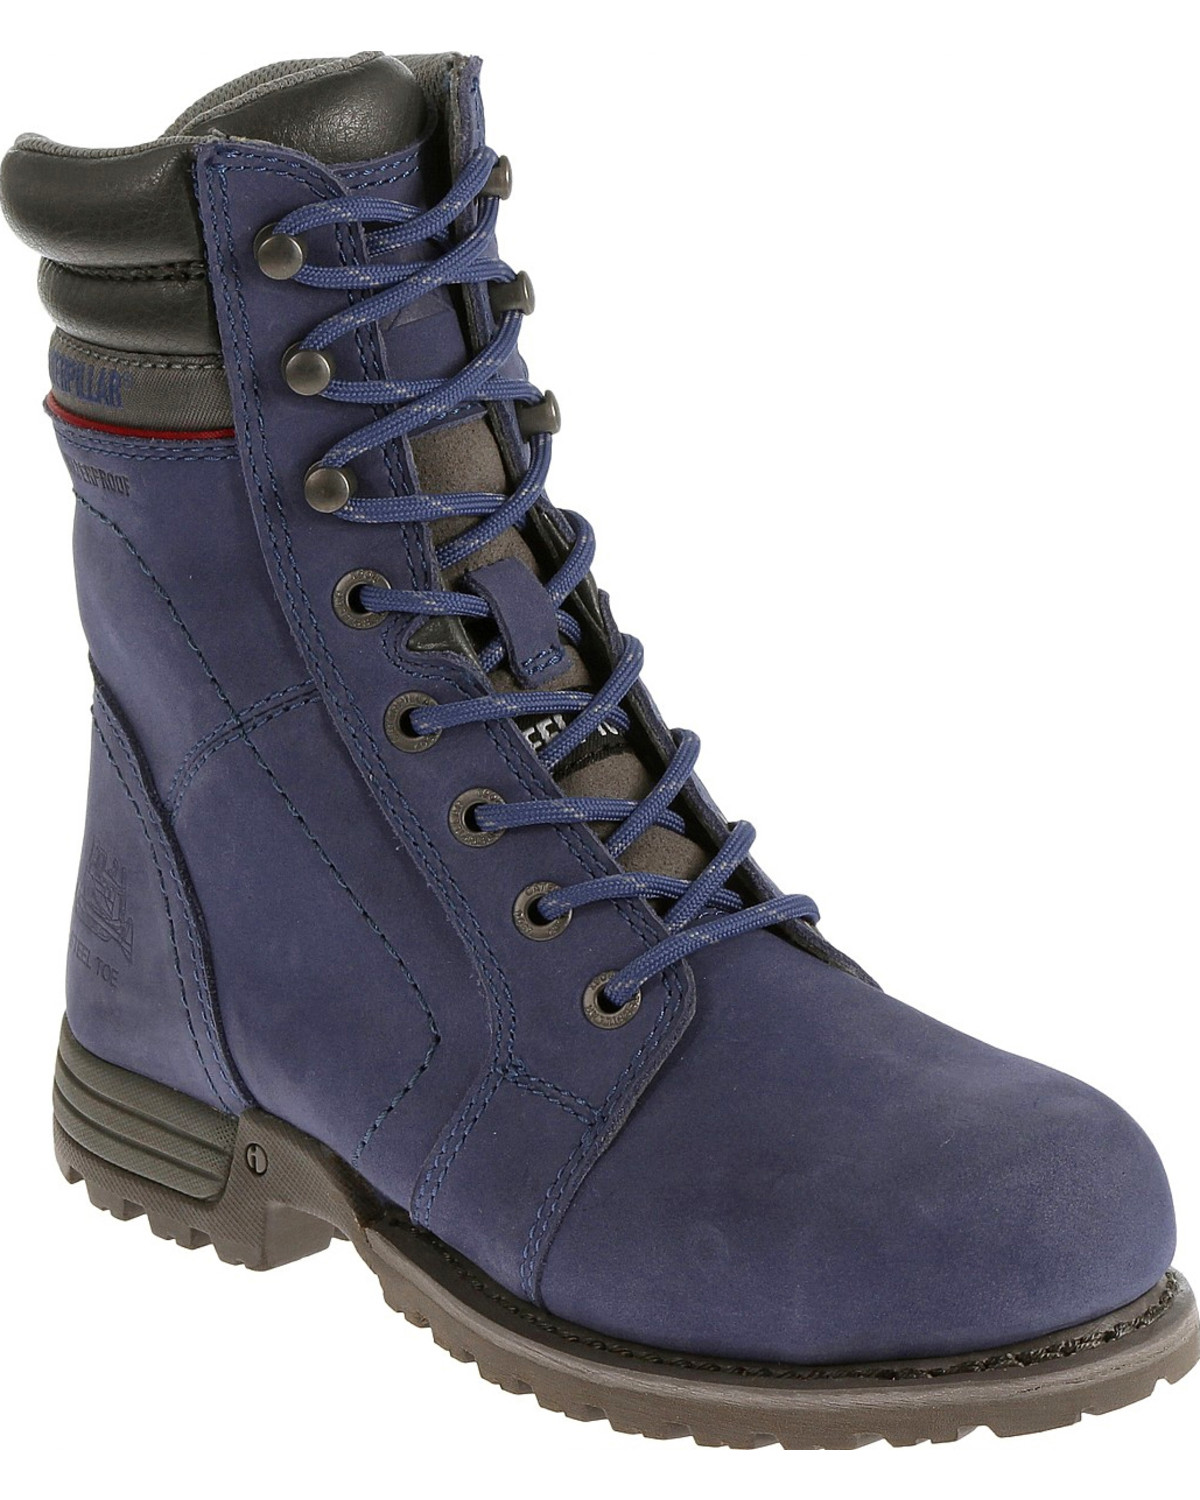 echo boots for women